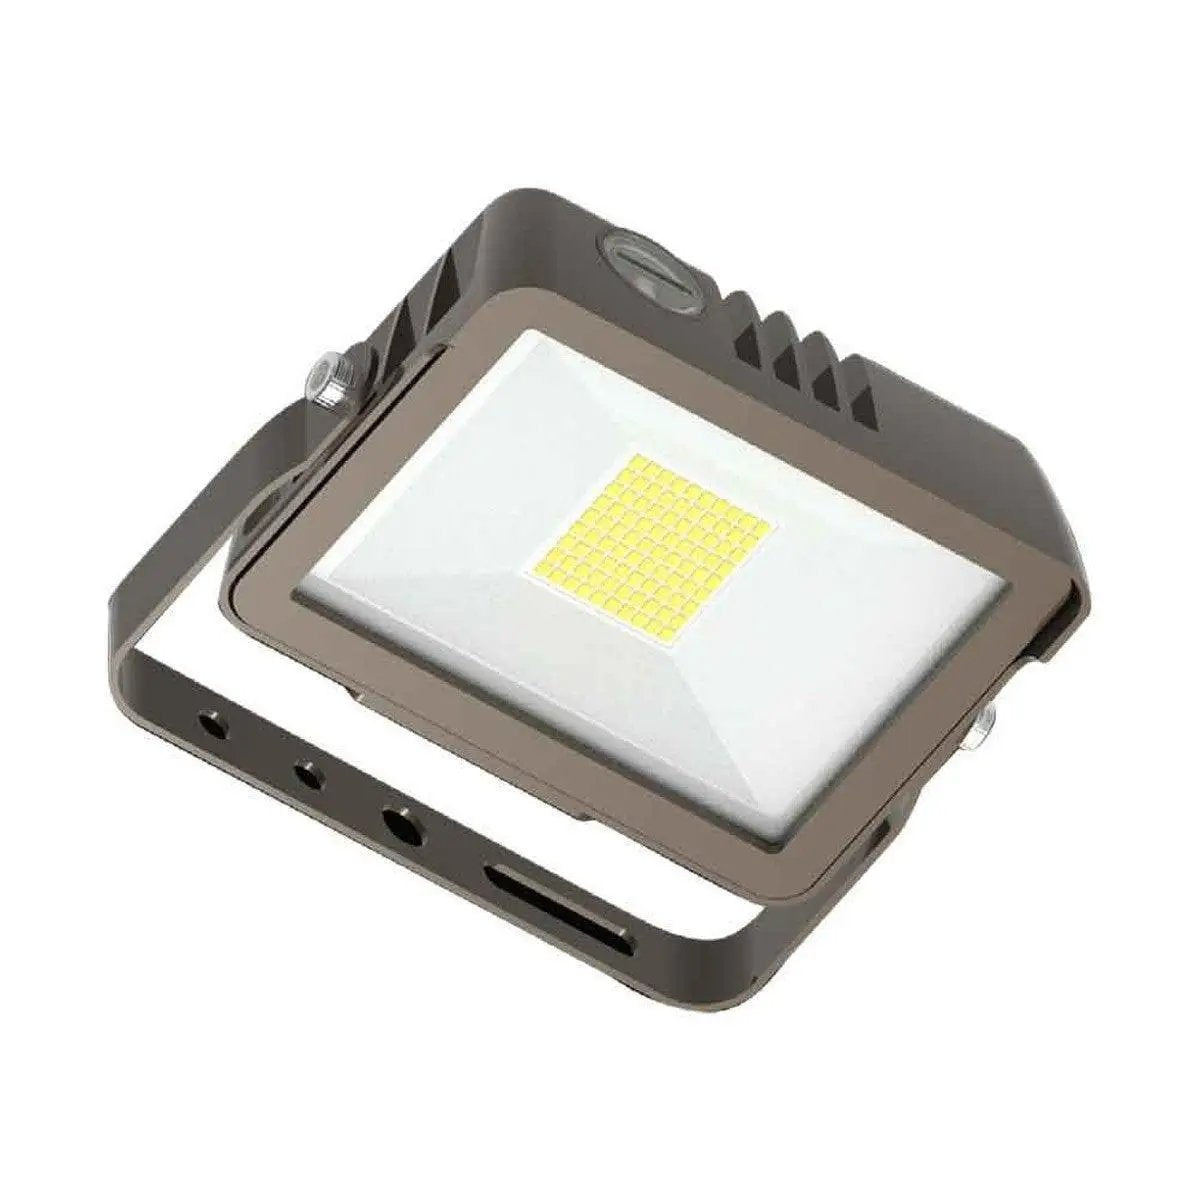 Waterproof outdoor flood light with adjustable white light, universal mounting options, and built-in photocell. 5075 lumens, 35W LED, 3000K-5000K color temperature. UL Listed, IP65 Rated, DLC Premium Listed. Mounting: Knuckle, Yoke. 5-year warranty.